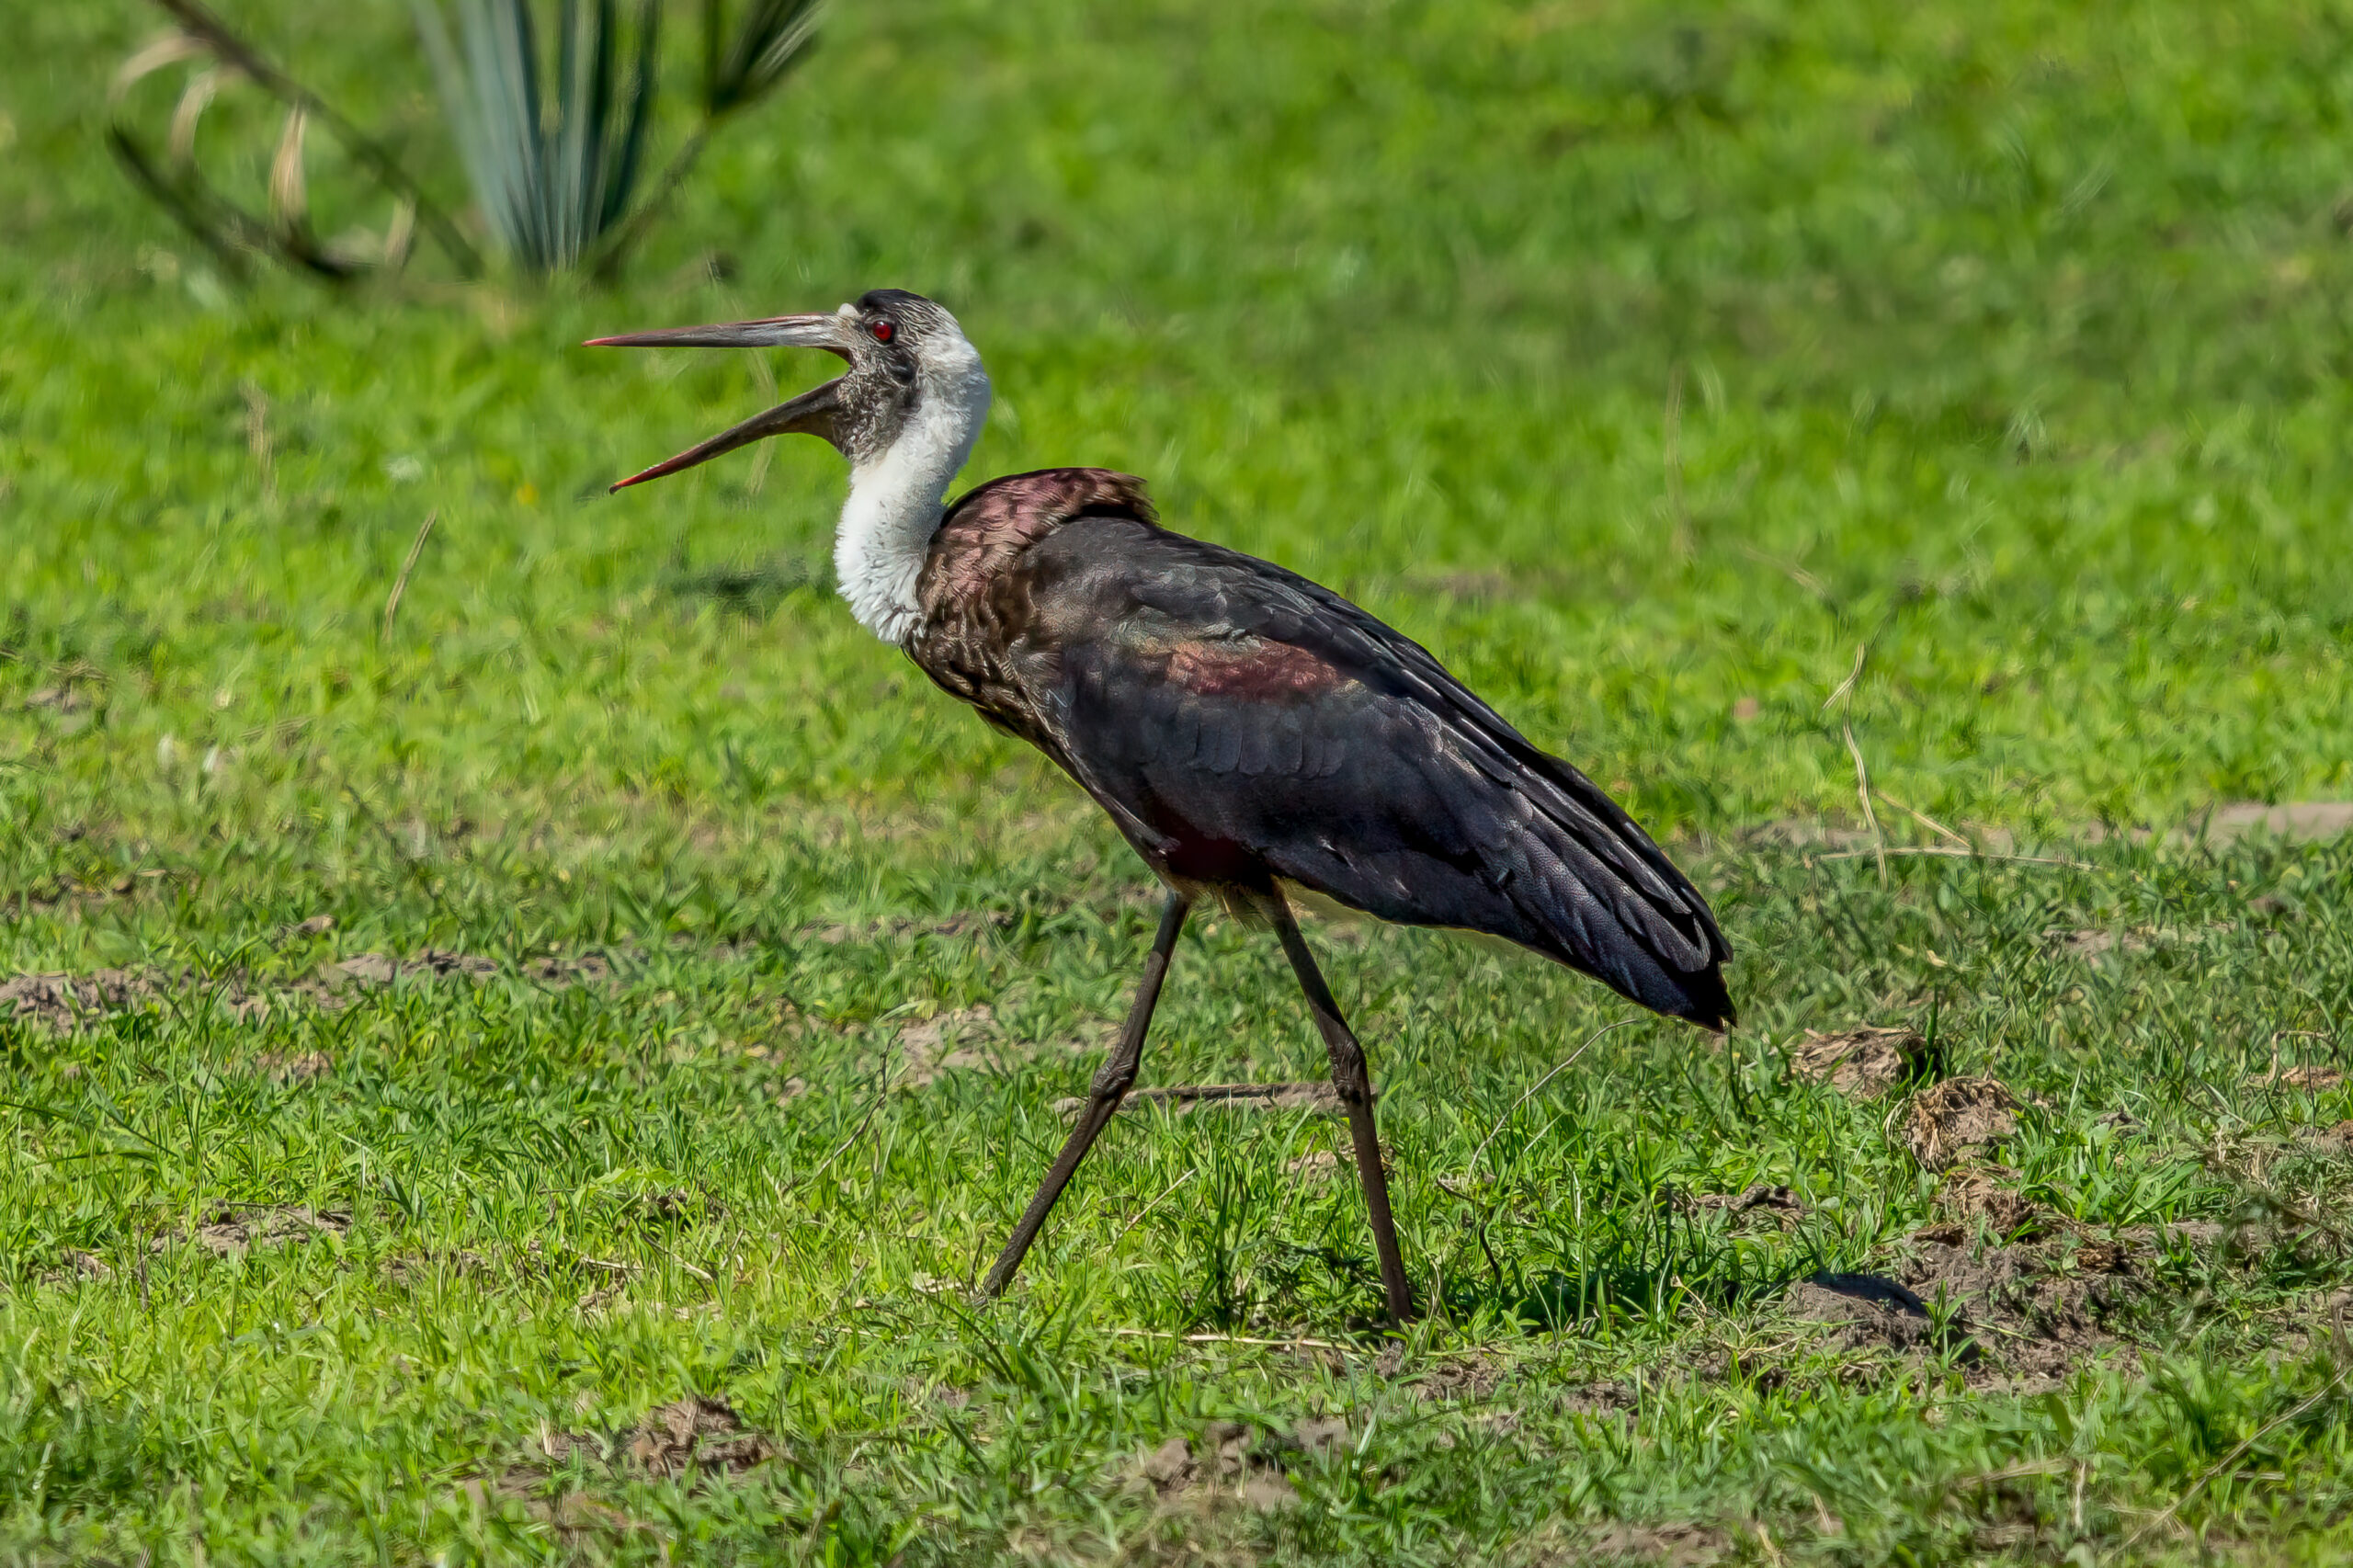 African Woolly-necked Stork (Ciconia microscelis) @ Tembe Elephant Park, South Africa. Photo: Håvard Rosenlund